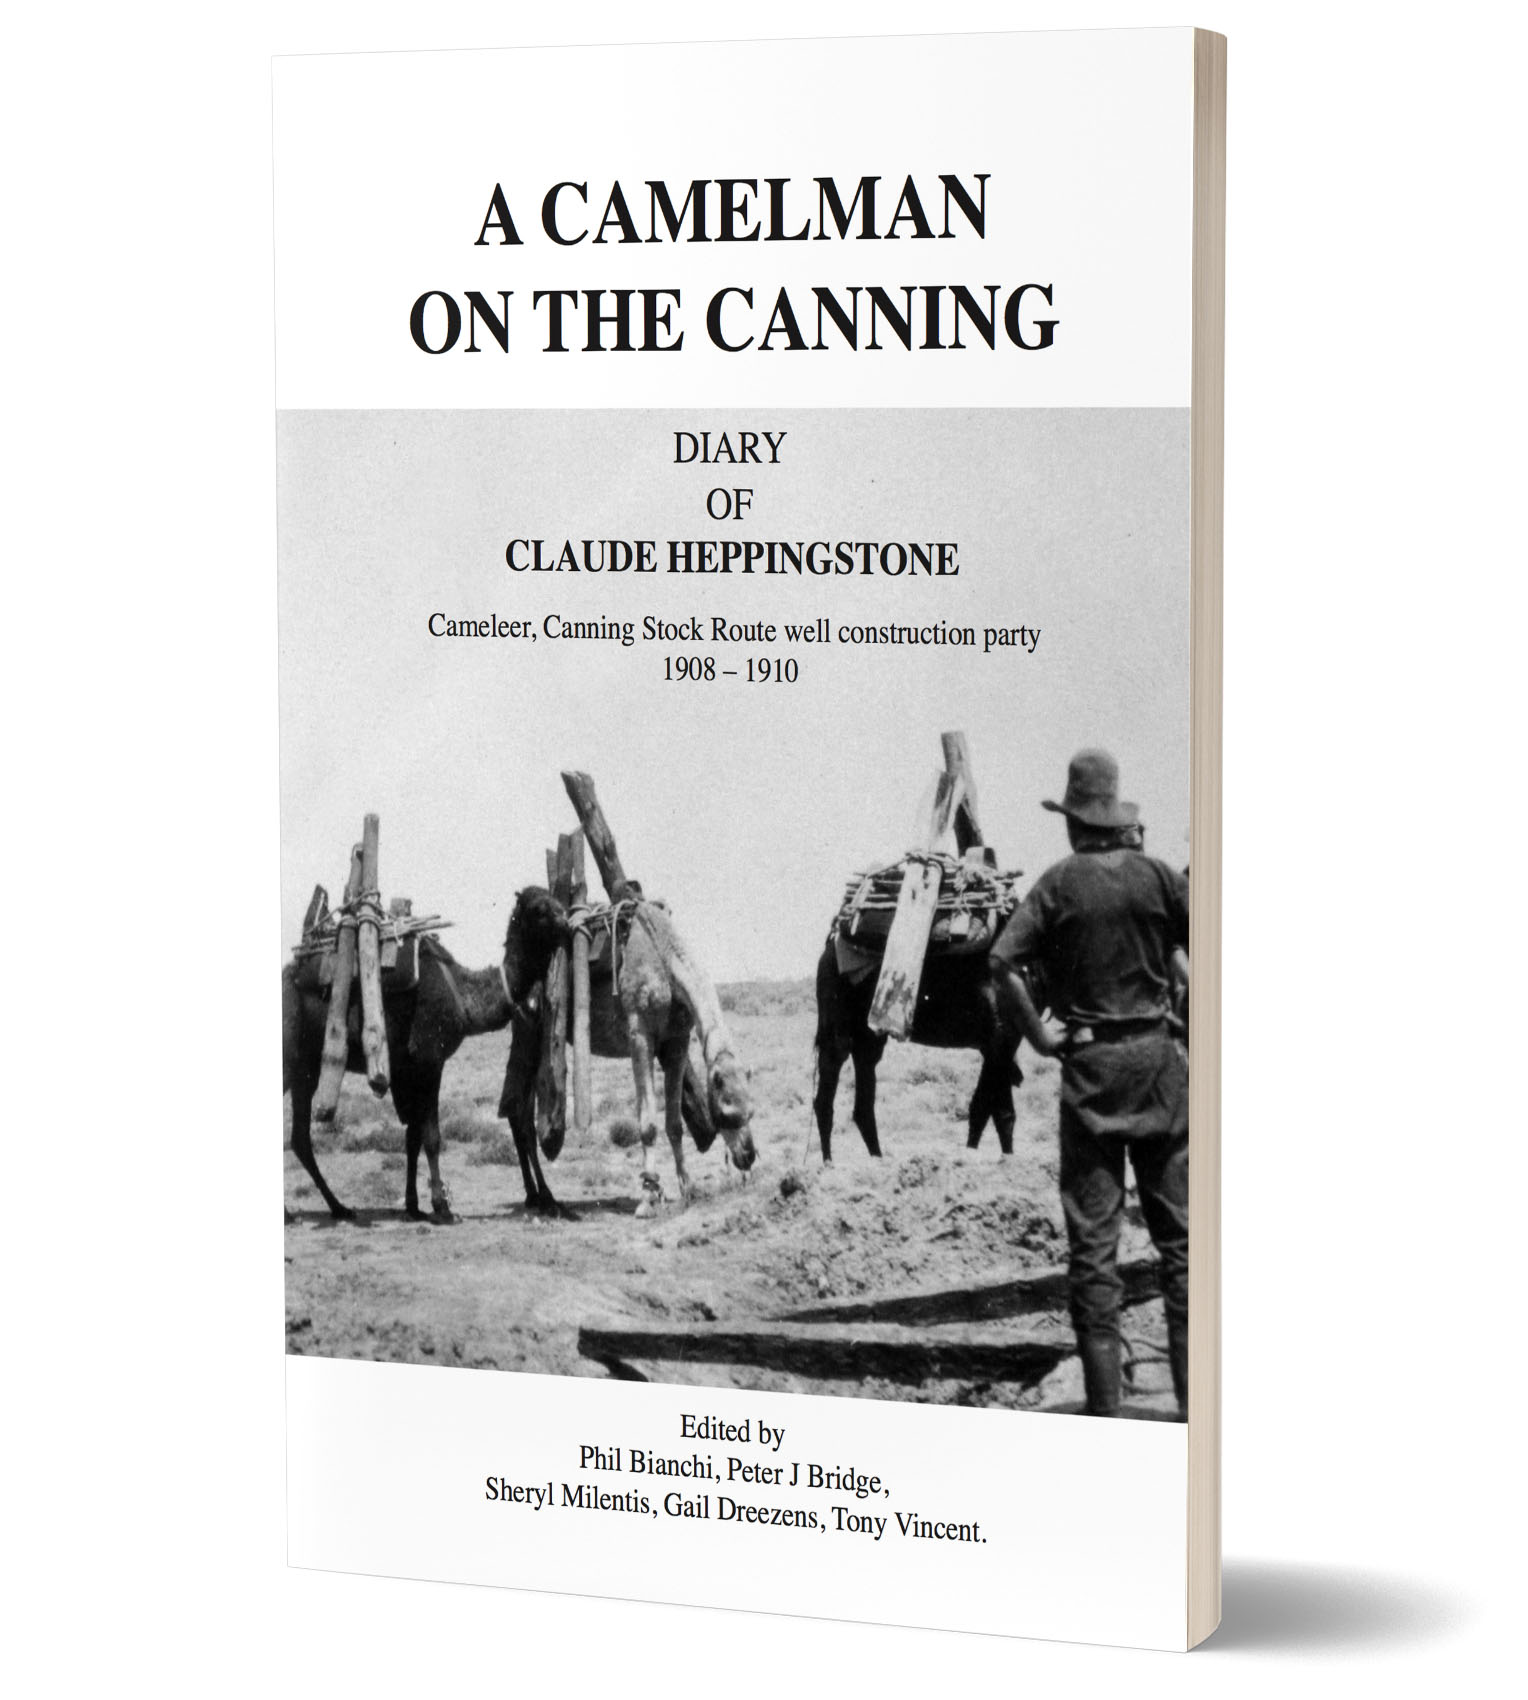 A Camelman on the Canning